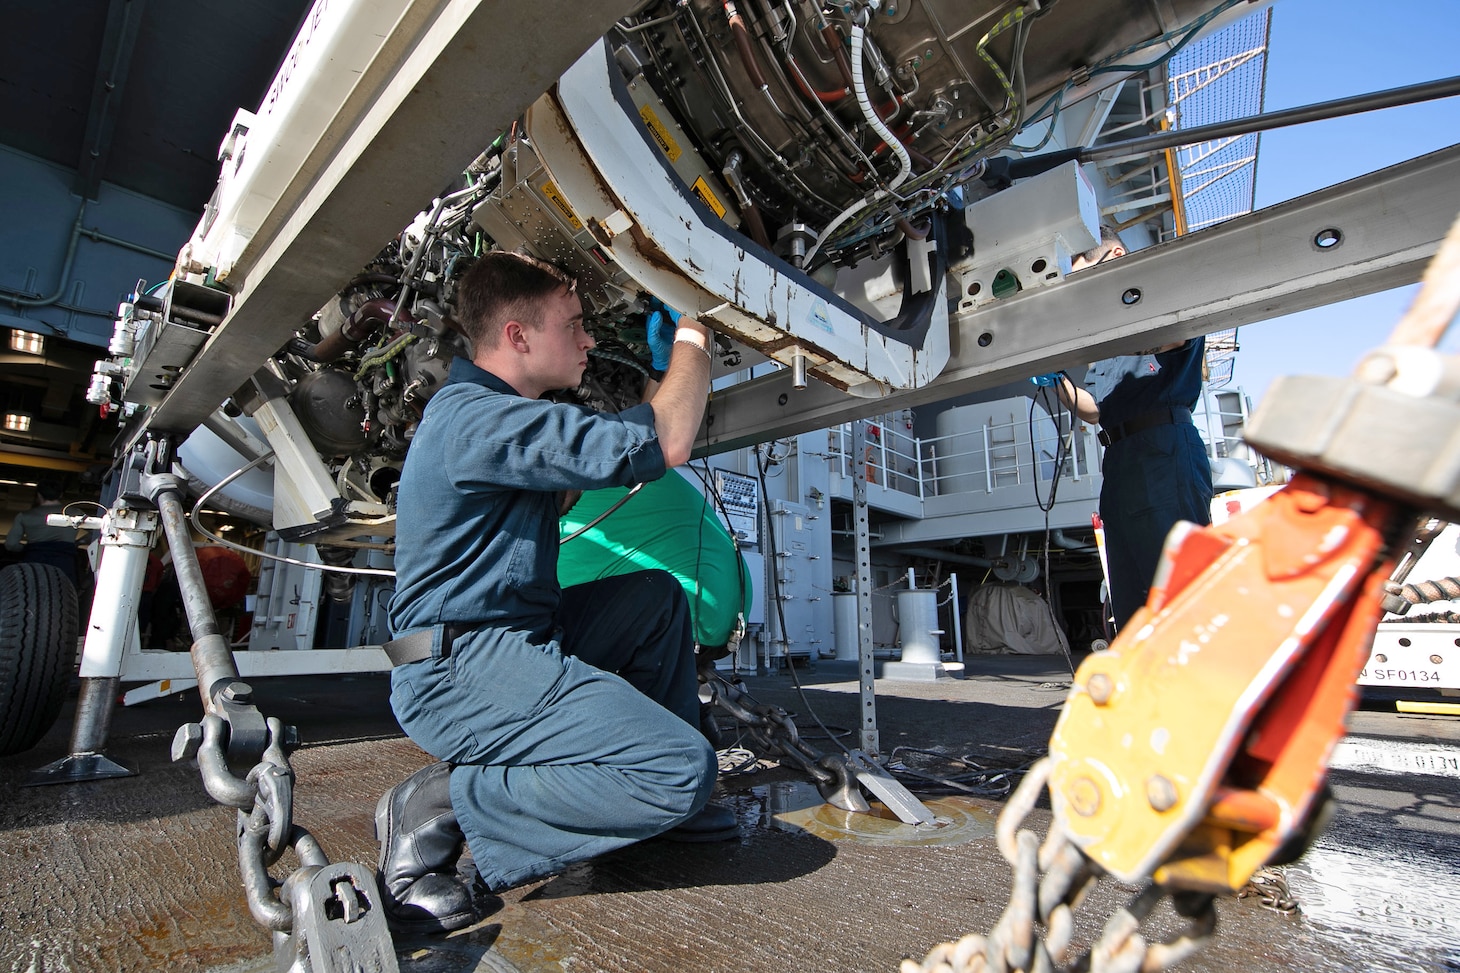 Aviation Machinist's Mate Airman Joseph Davis, from Asheville, North Carolina, assigned to the world's largest aircraft carrier USS Gerald R. Ford's (CVN 78) aircraft intermediate maintenance department (AIMD), prepares an F/A-18 Super Hornet engine to be transported into Gerald R. Ford's engine bay, June 14, 2023. Gerald R. Ford is the U.S. Navy's newest and most advanced aircraft carrier, representing a generational leap in the U.S. Navy's capacity to project power on a global scale. The Gerald R. Ford Carrier Strike Group is on a scheduled deployment in the U.S. Naval Forces Europe area of operations, employed by U.S. Sixth Fleet to defend U.S., allied, and partner interests.